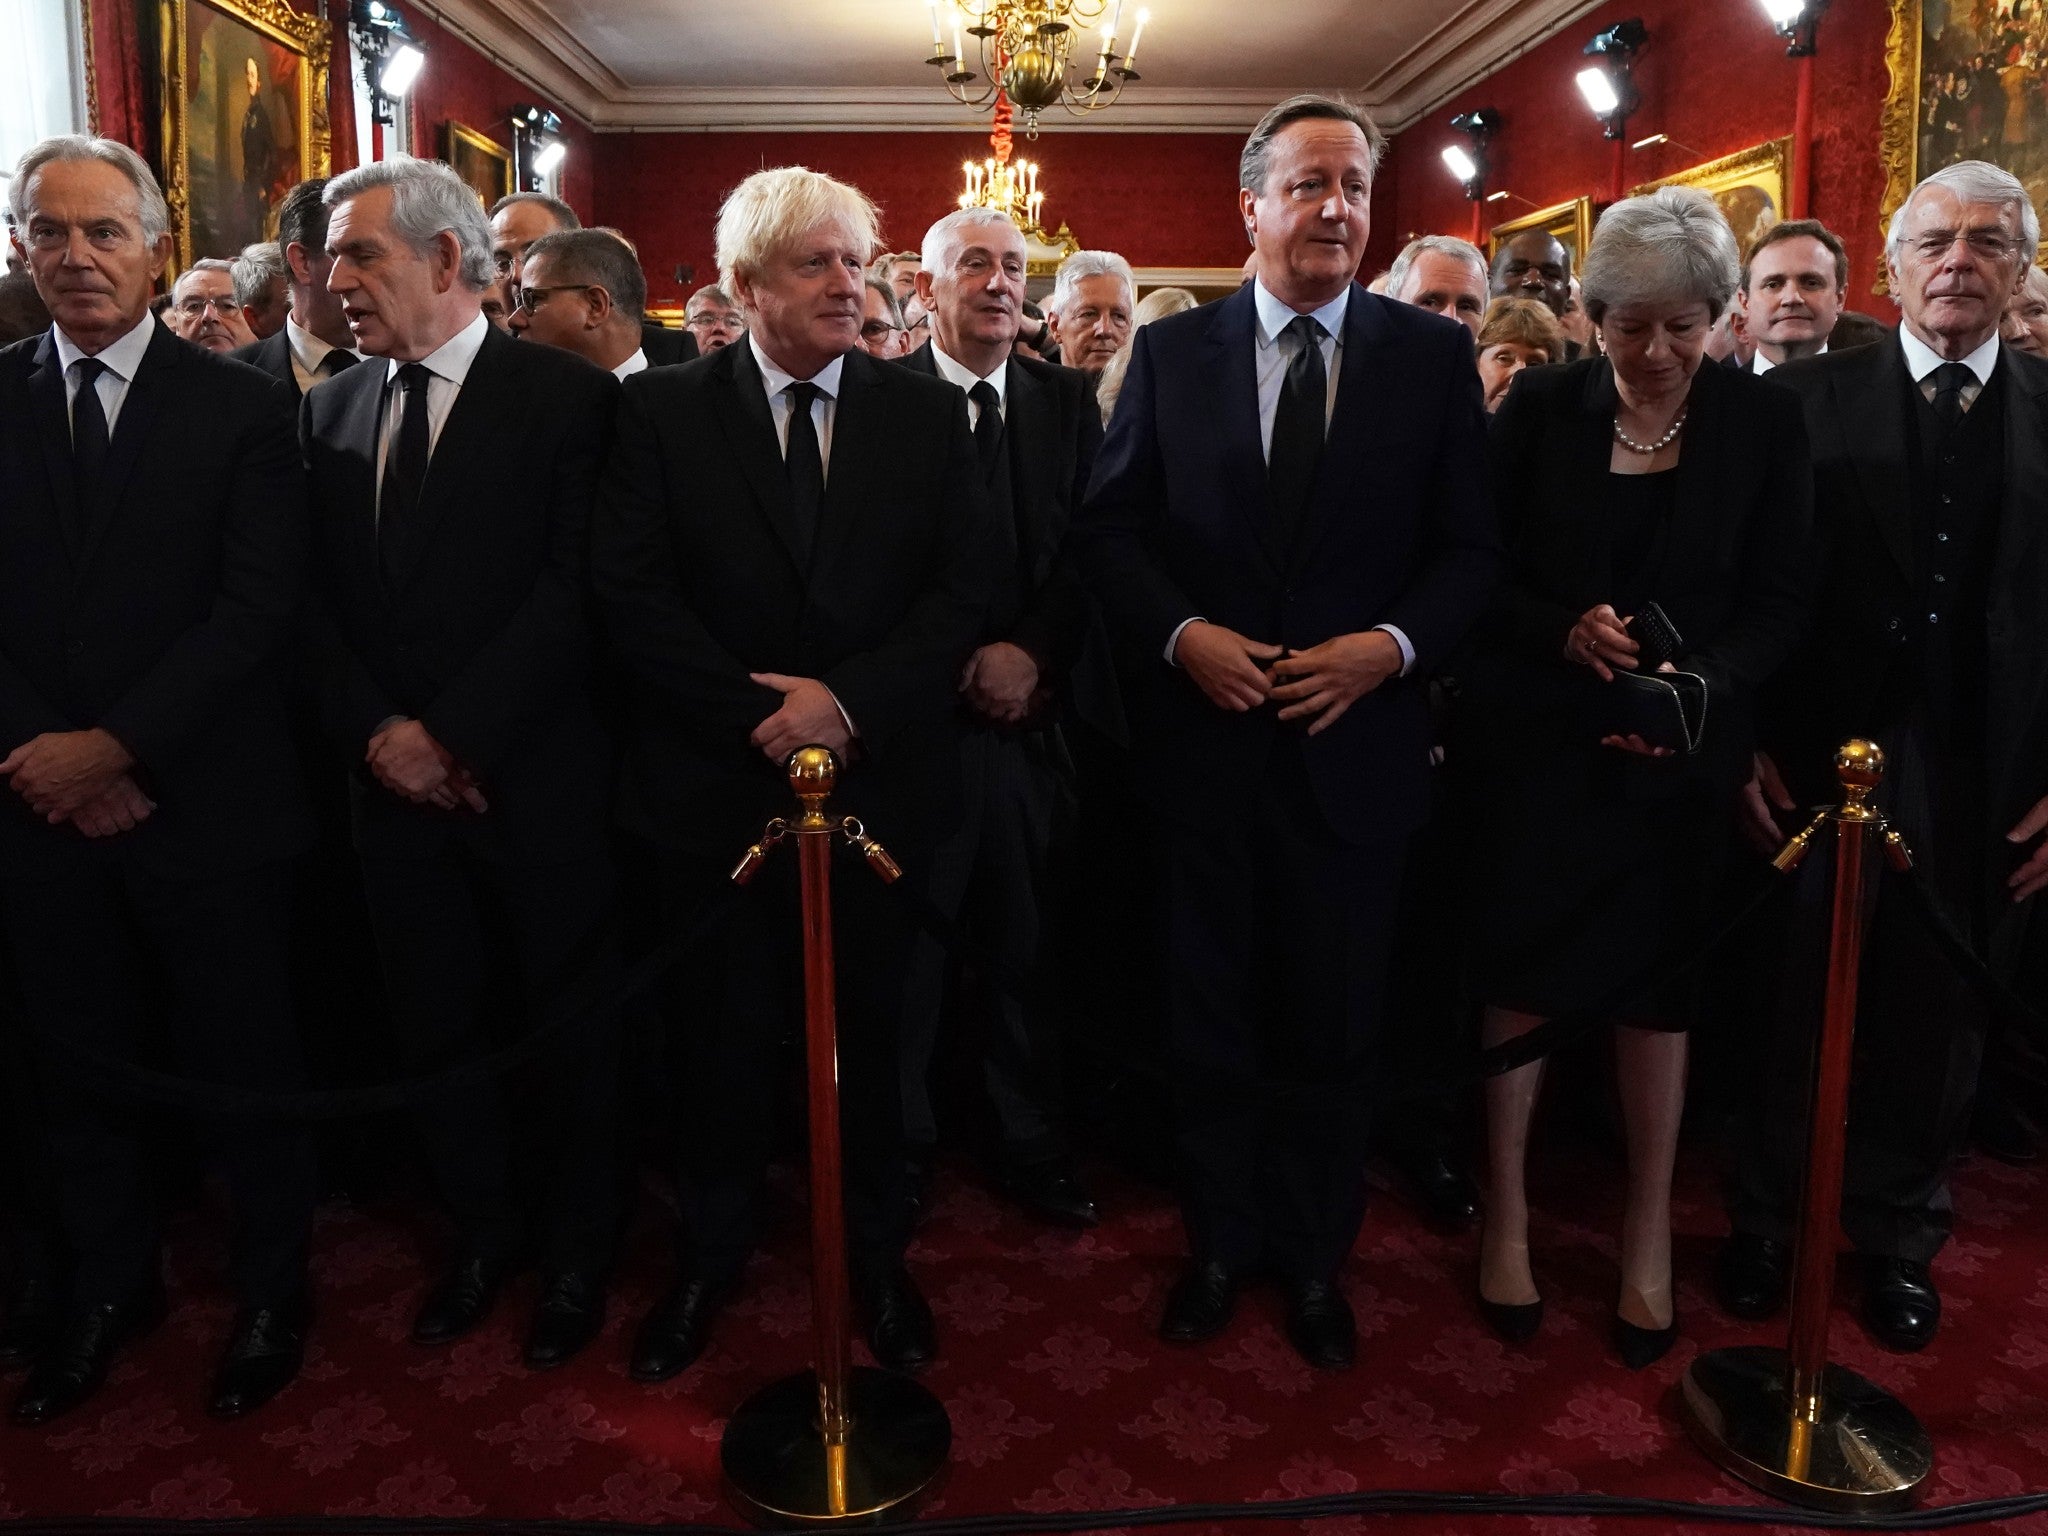 Former prime ministers (from left) Tony Blair, Gordon Brown, Boris Johnson, David Cameron, Theresa May and John Major ahead of the accession council ceremony at St James’s Palace